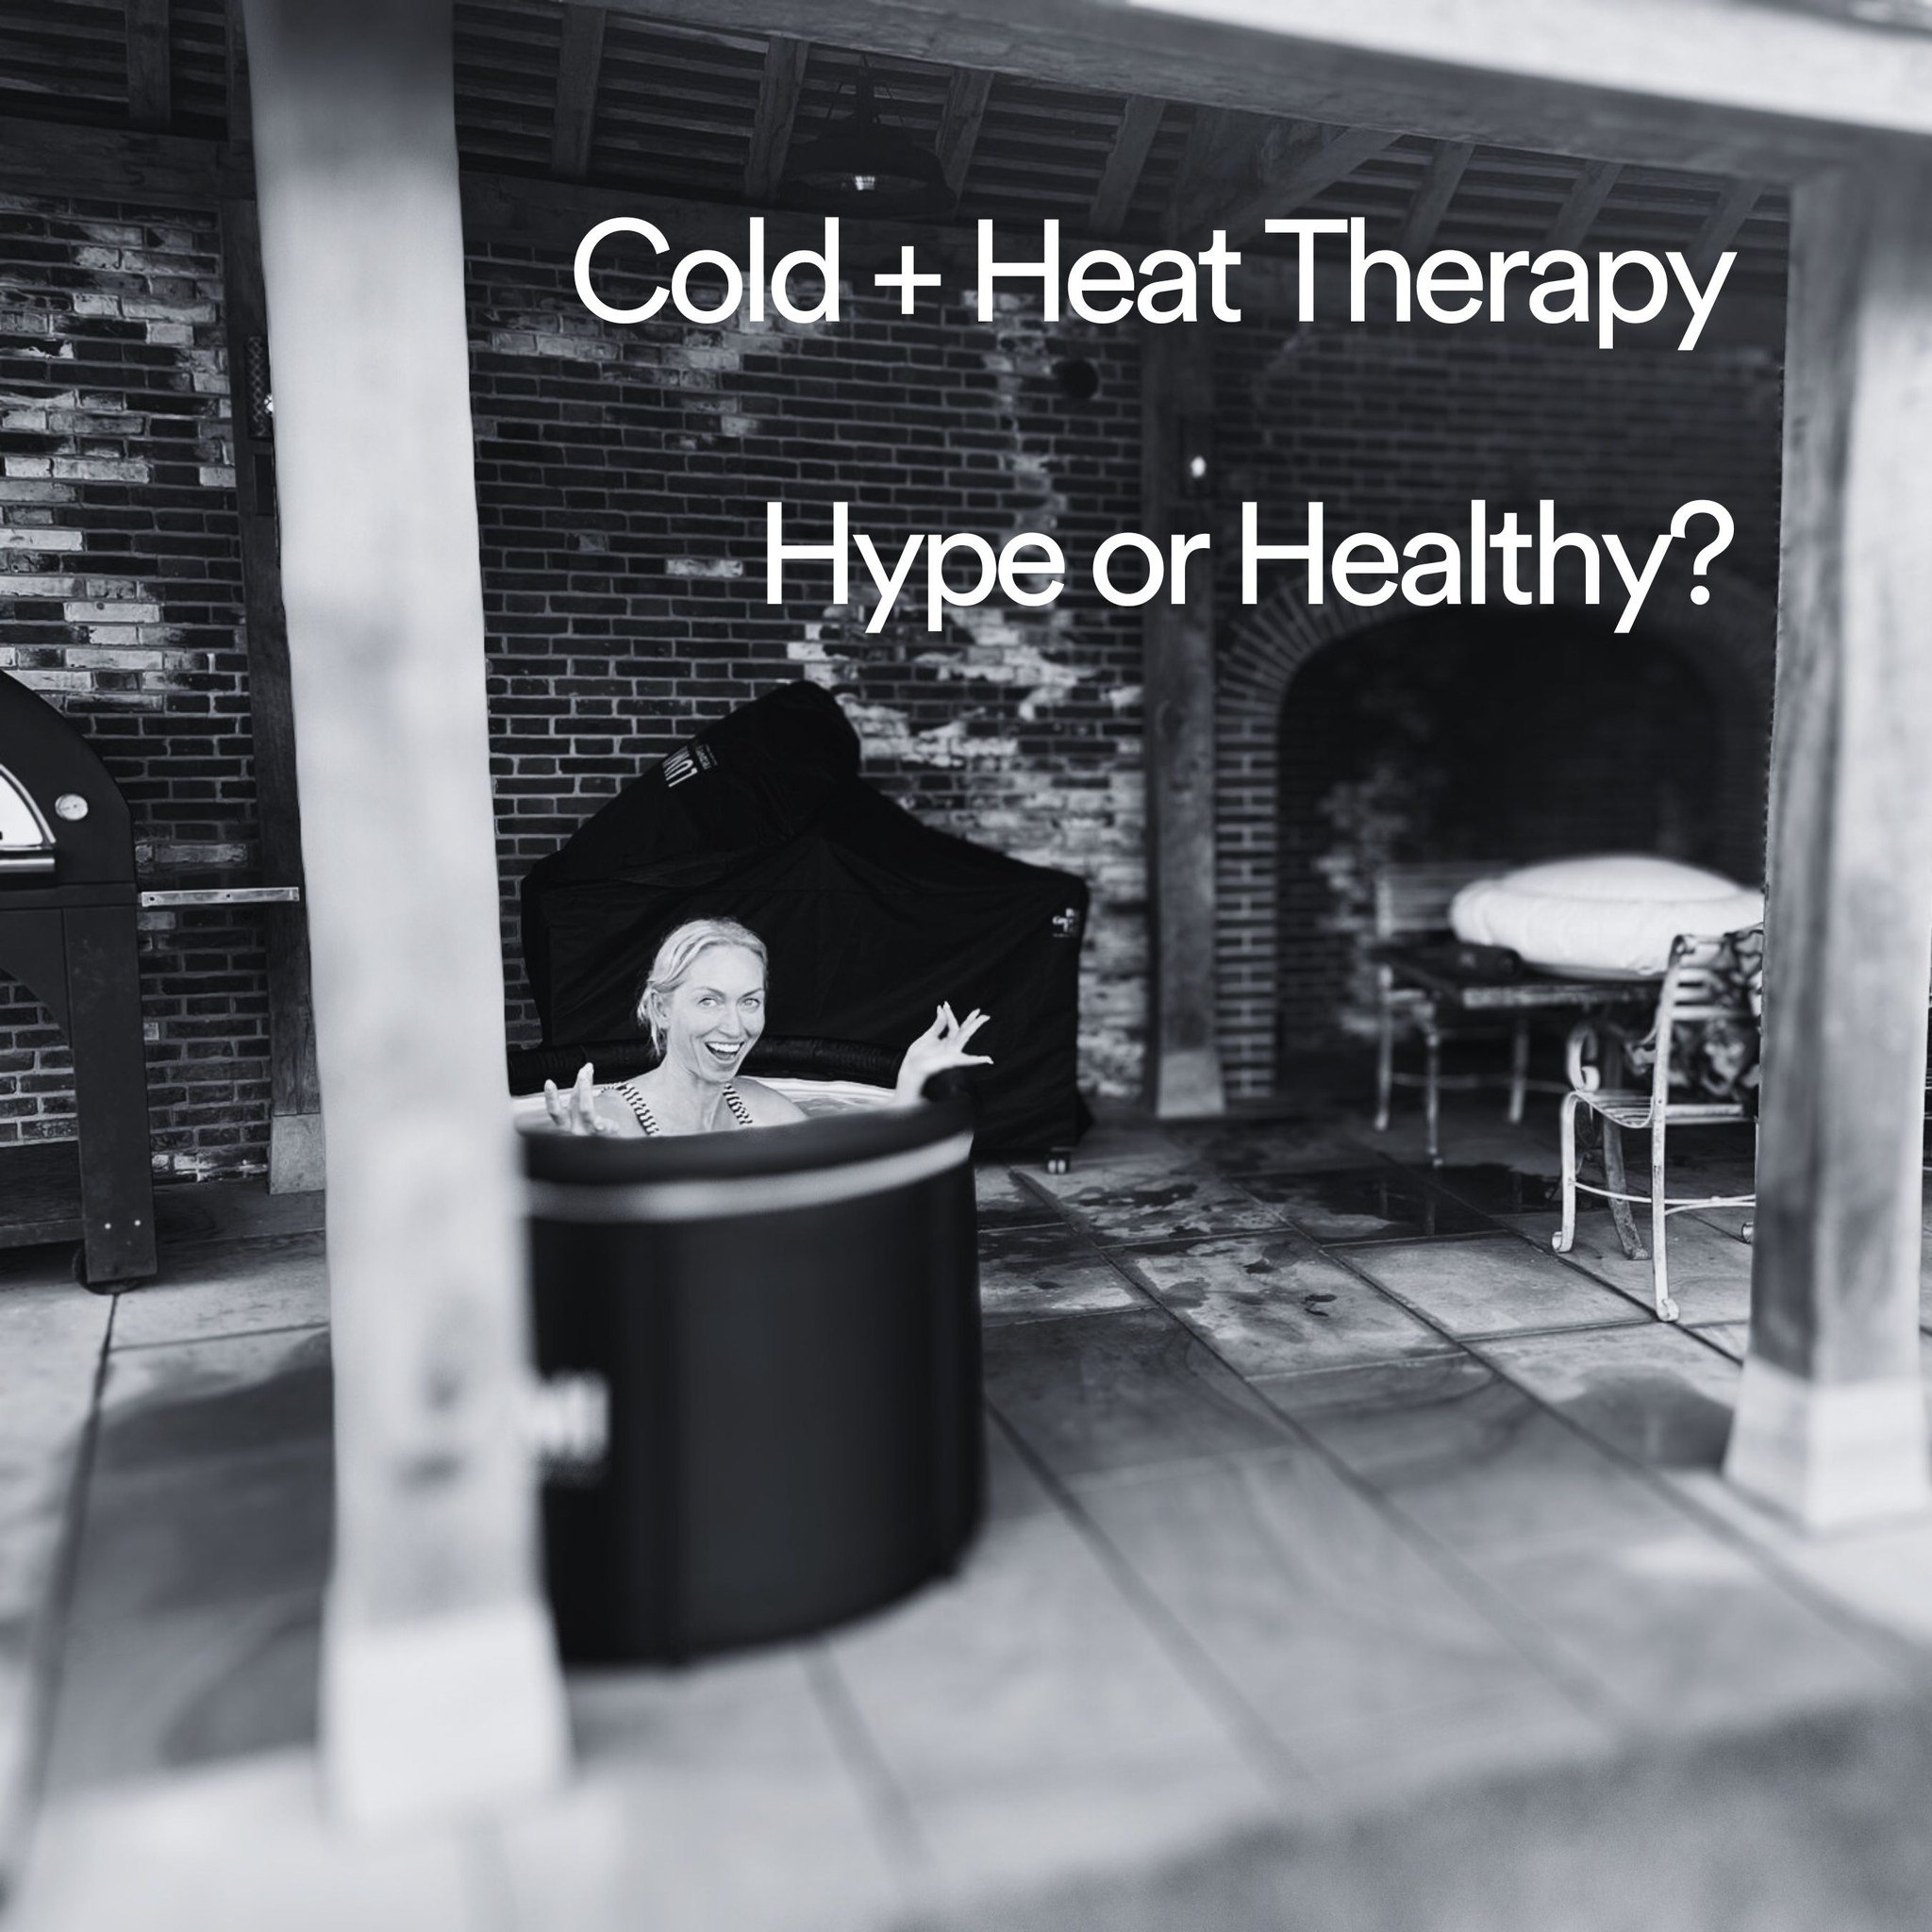 Cold ❄️ + Heat 🔥 Therapy - Hype or Healthy?

Plunge Into The Benefits of Cold Therapy:
1. Improves stress resilience: cold water therapy is a training sensor for your nervous system. Cold sensors on the skin activate your sympathetic + parasympathet